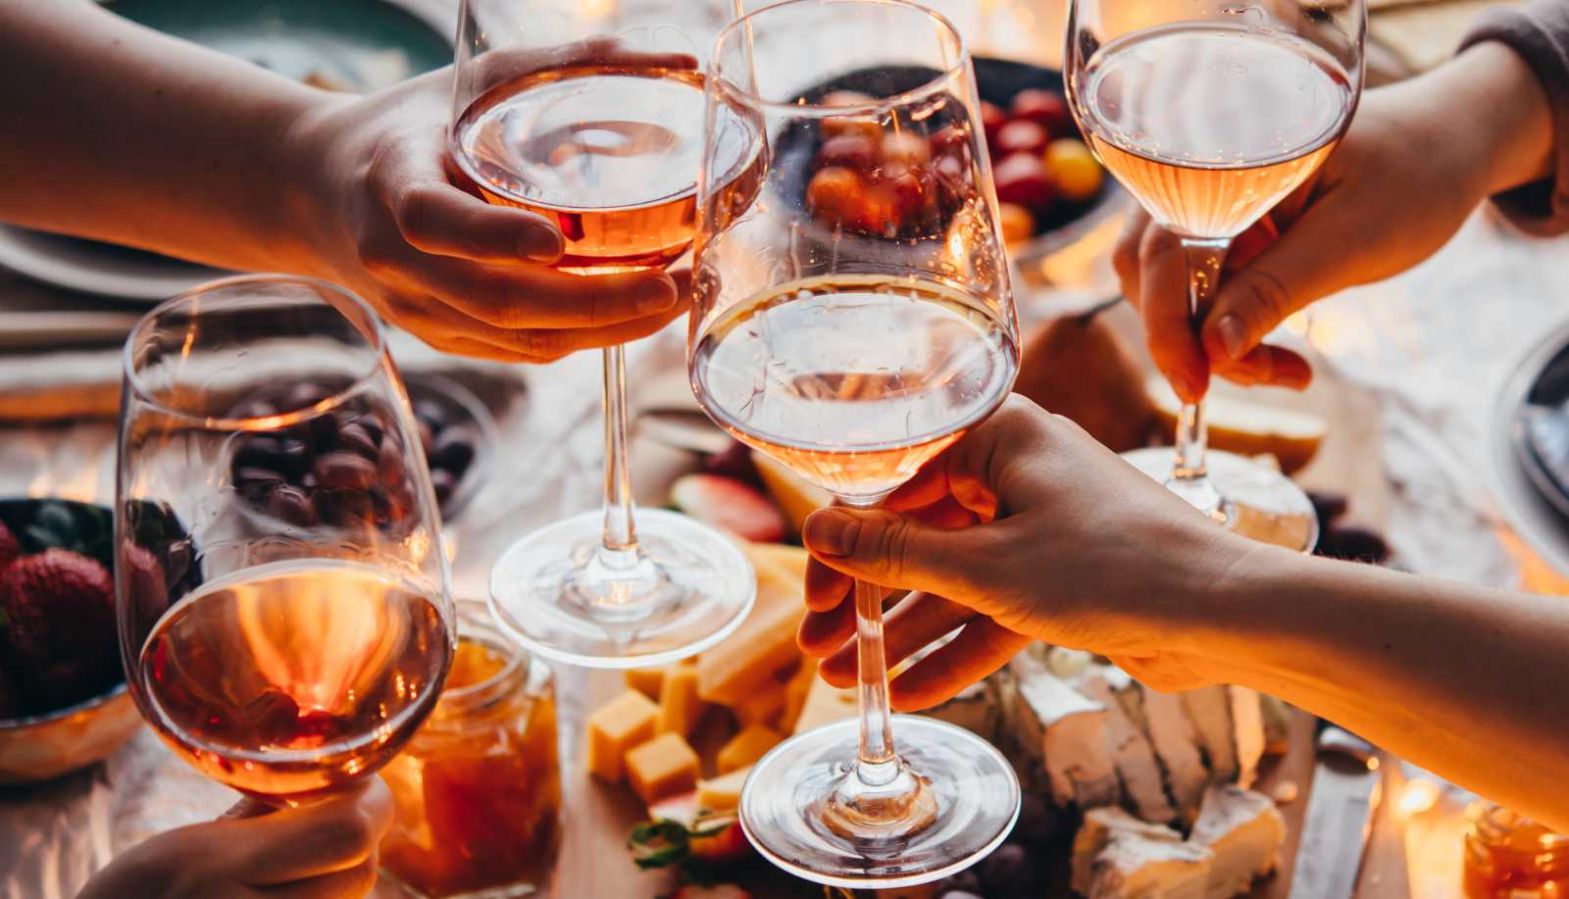 Is rosé wine sweet or dry? - friends toast their glasses of rose wine